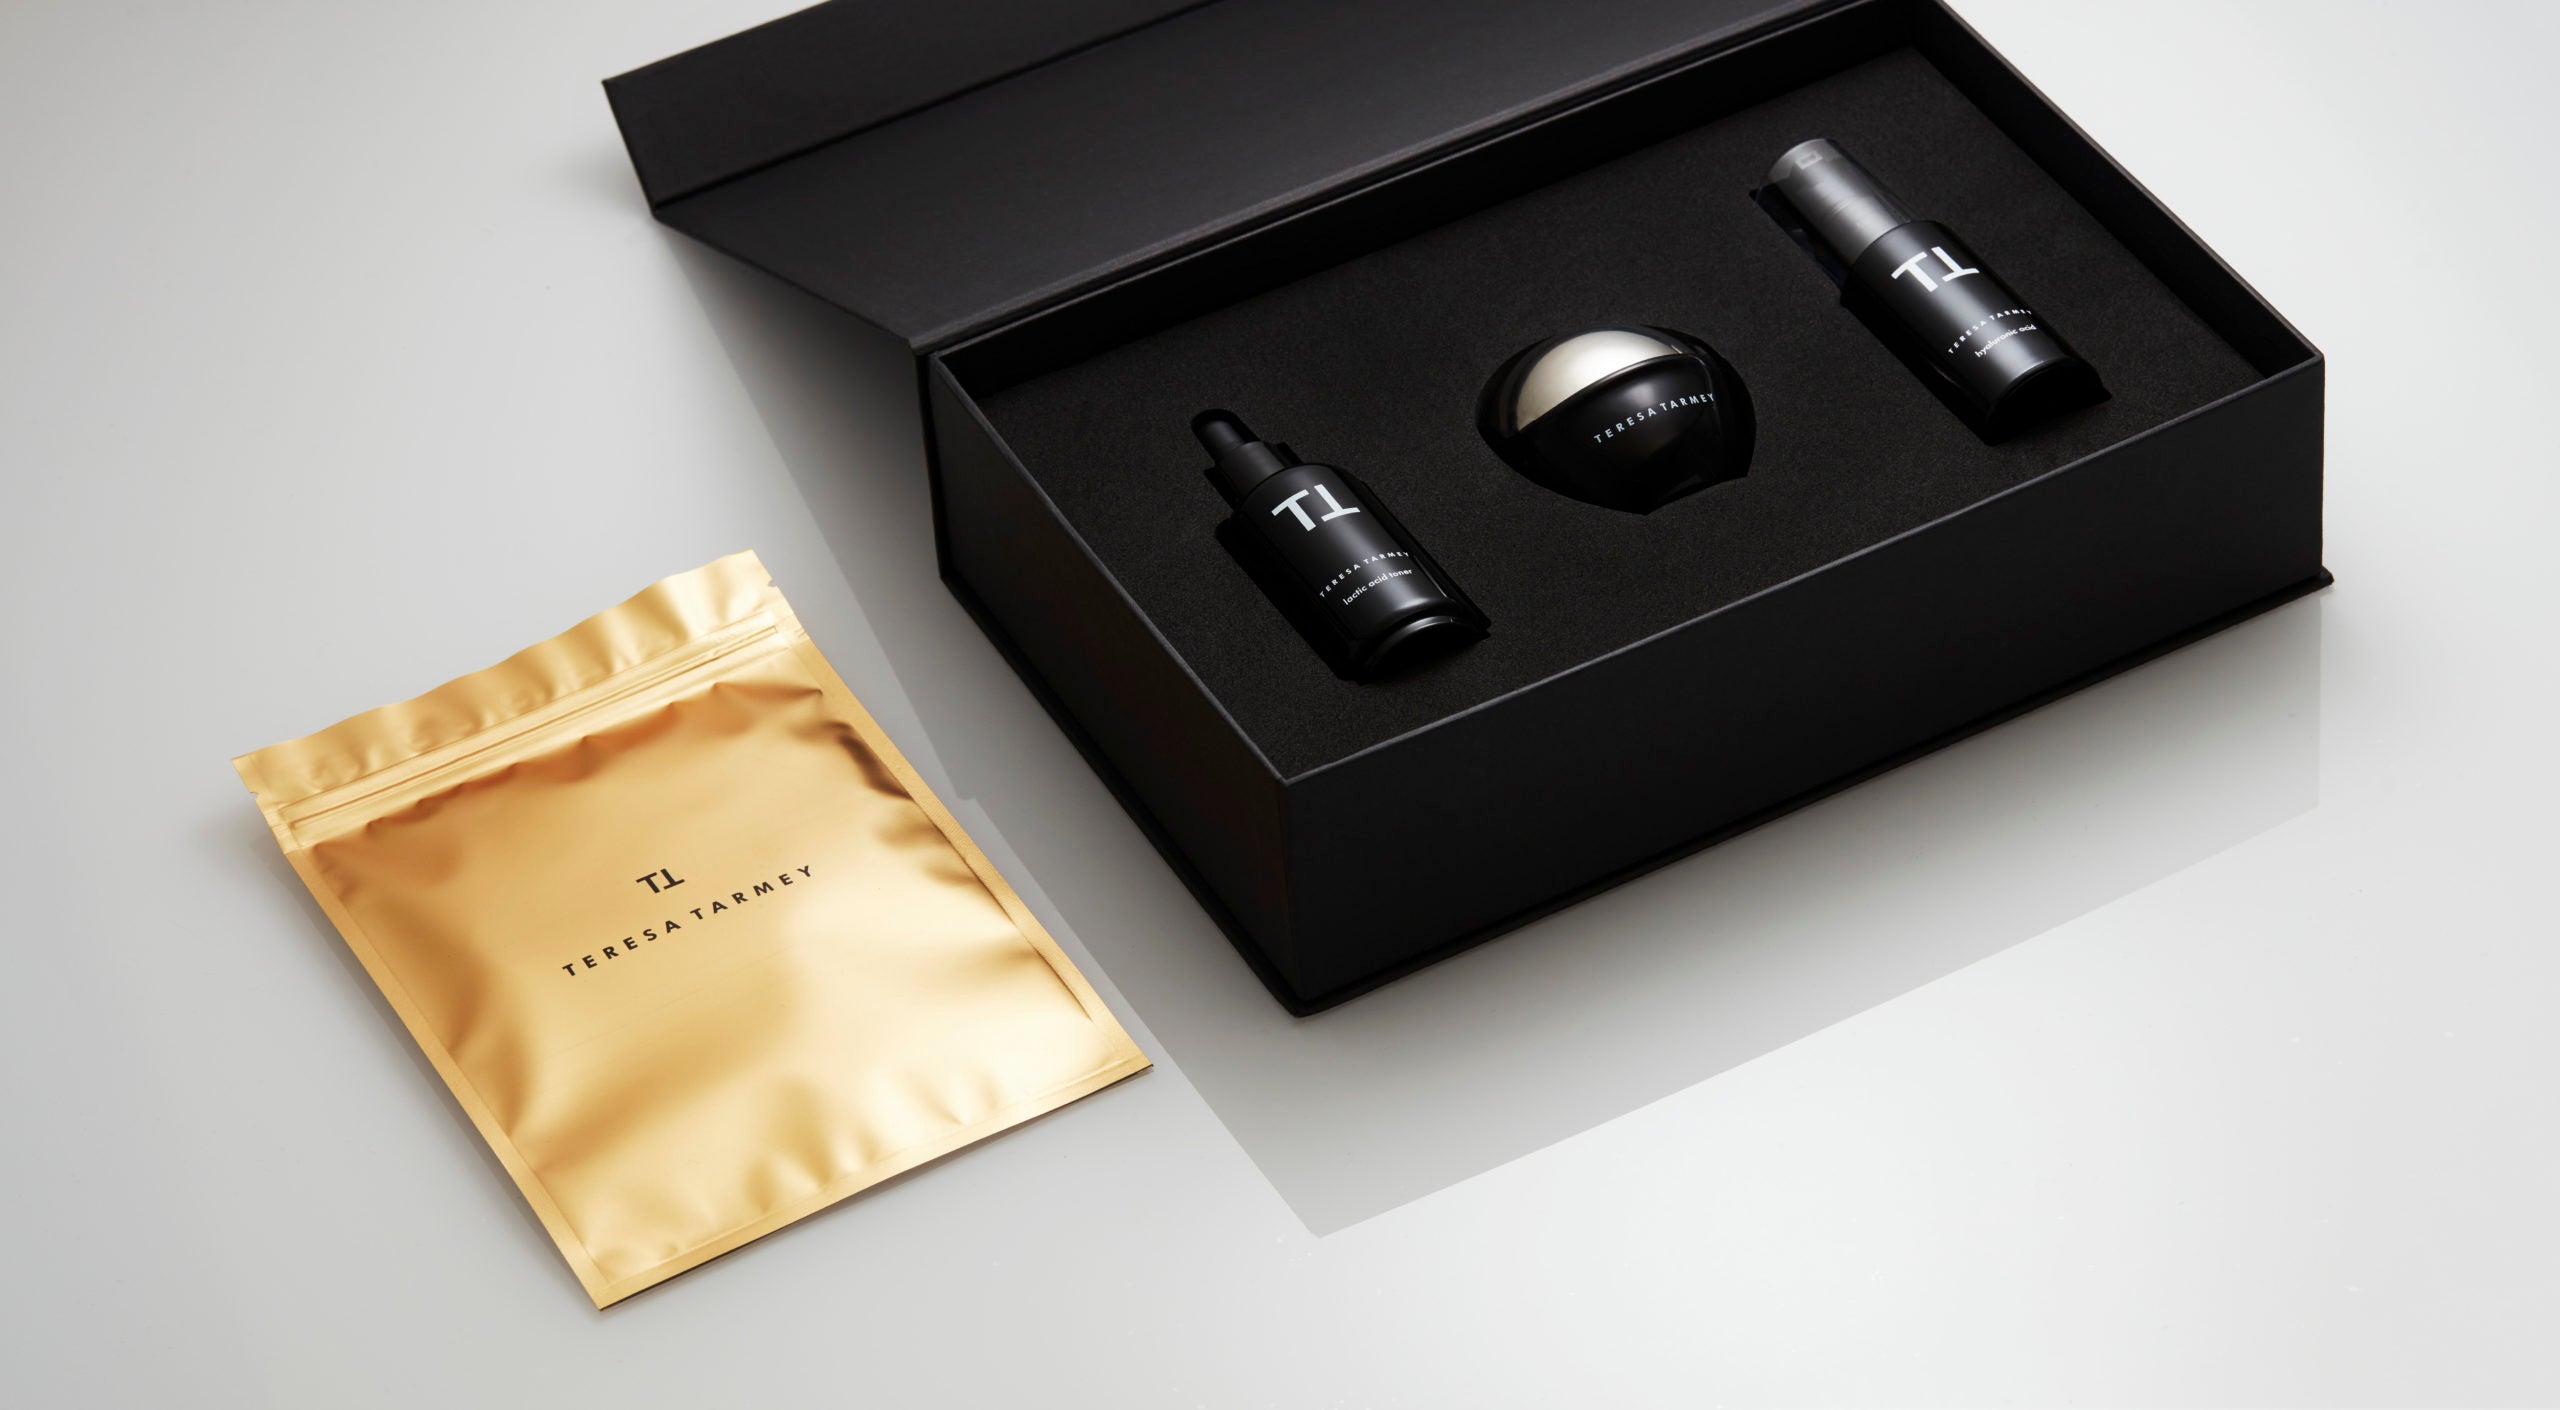 Skincare Expert Teresa Tarmey Launches At-Home Cryotherapy Kit